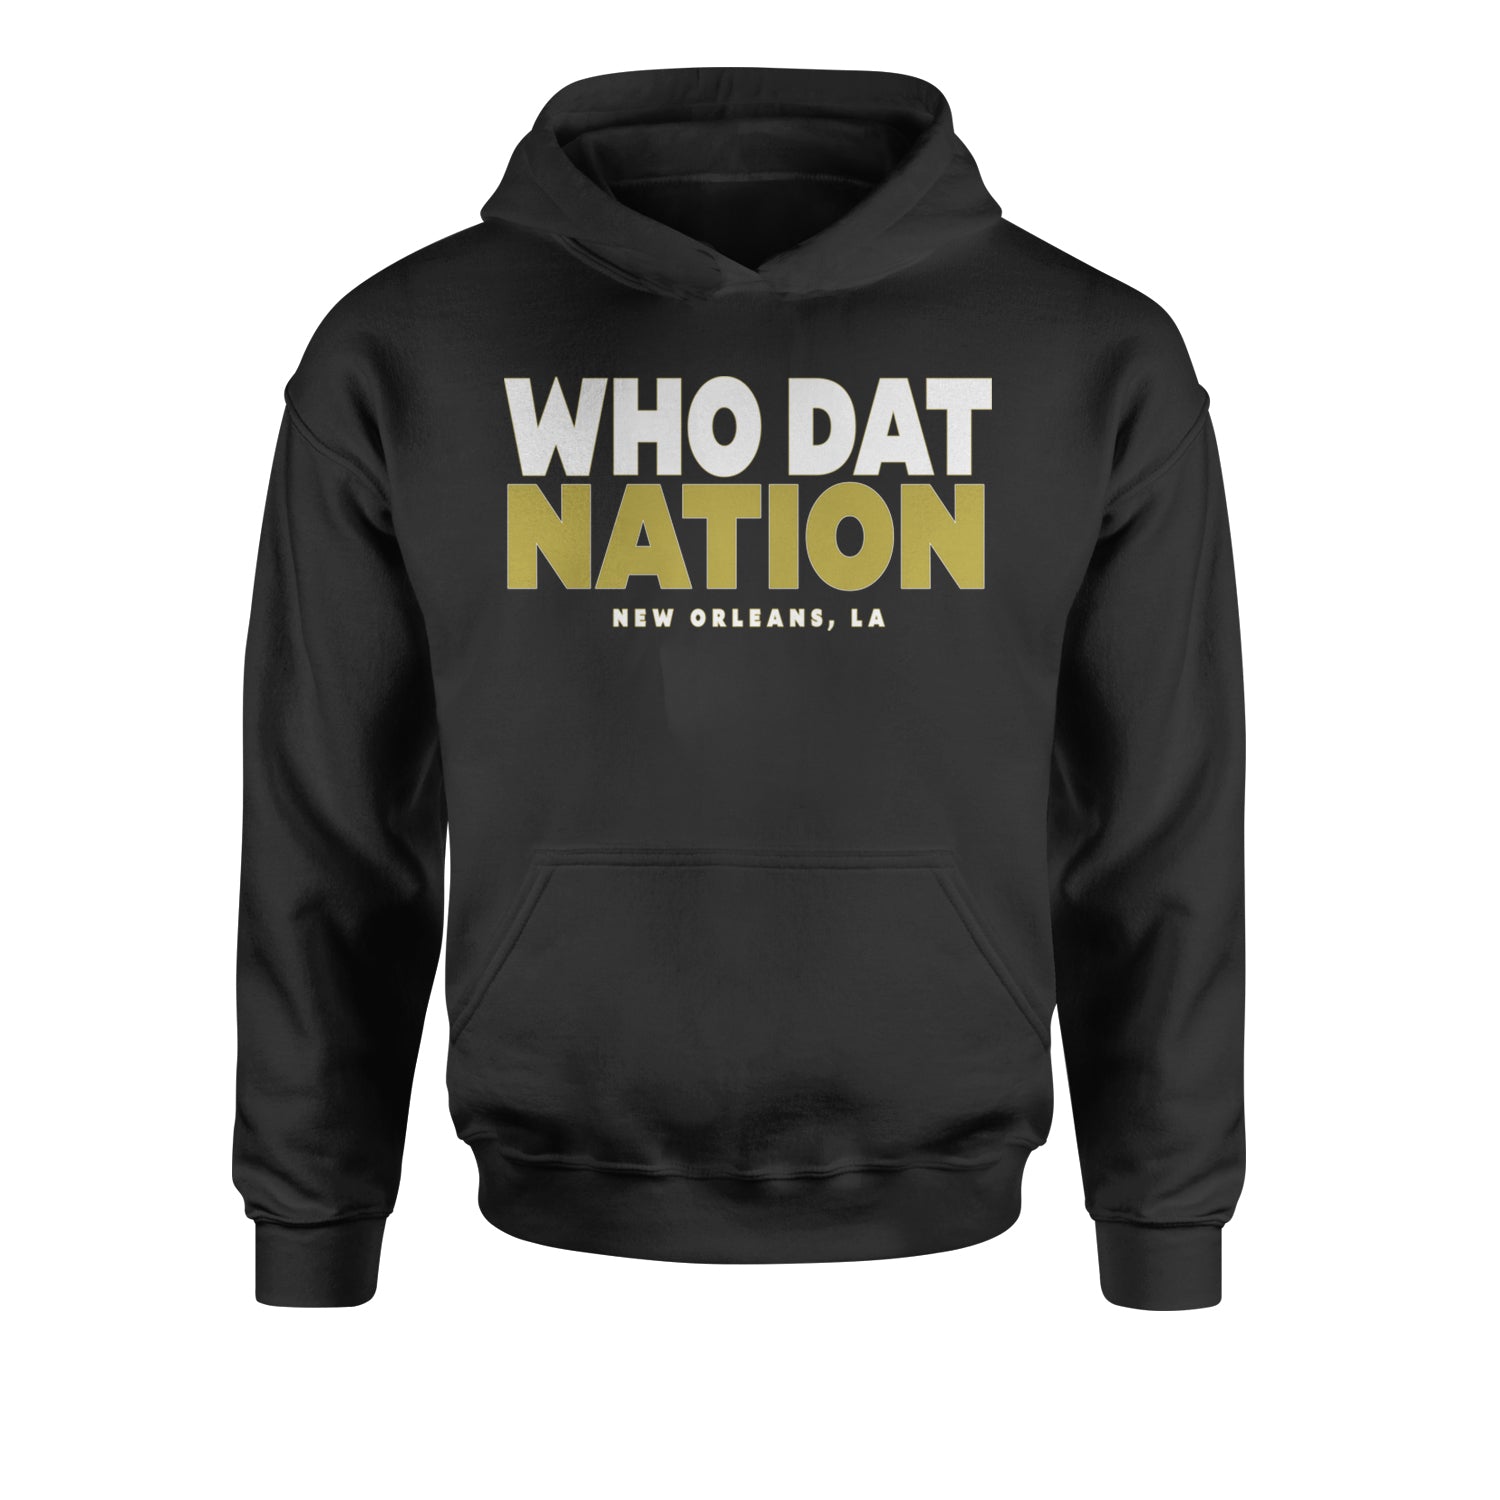 New Orleans Who Dat Nation Youth-Sized Hoodie